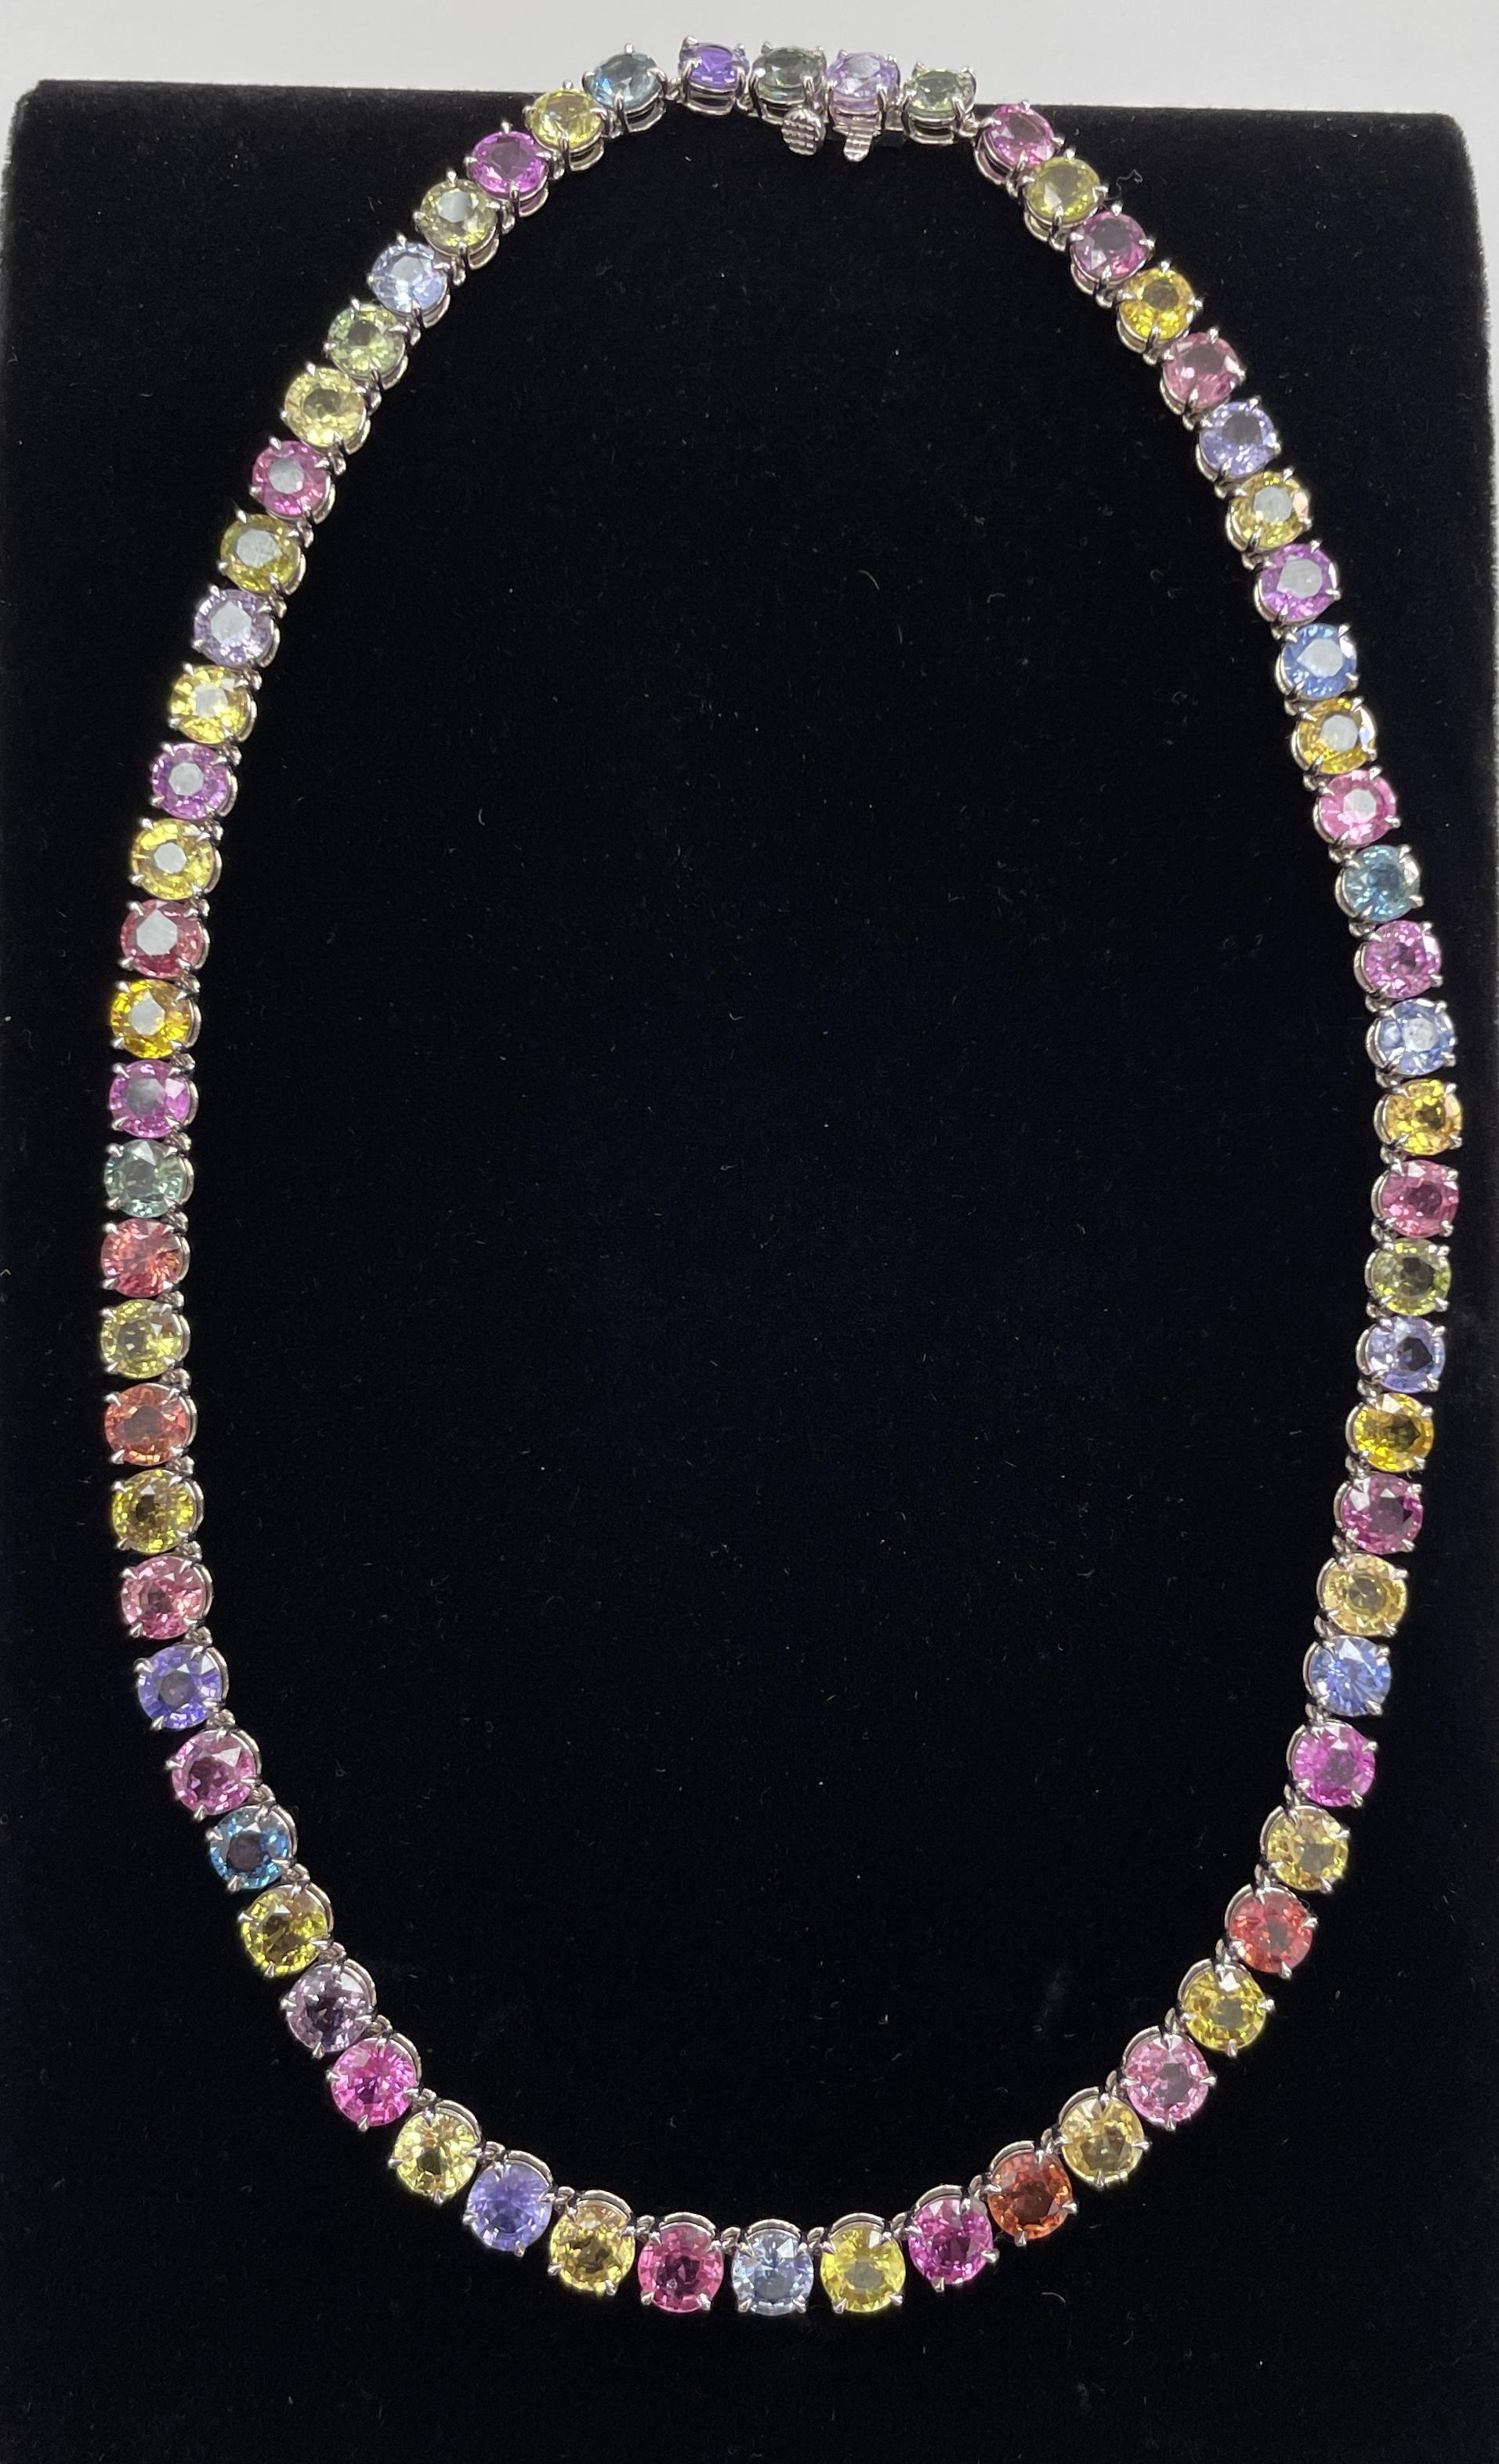 A multi color natural sapphire necklace; sixty-eight 6MM assorted round, pastel-colored sapphires that are none heat treated, weighing 74.87Ct set in 18K white gold. BEAUTIFUL for any occasion!